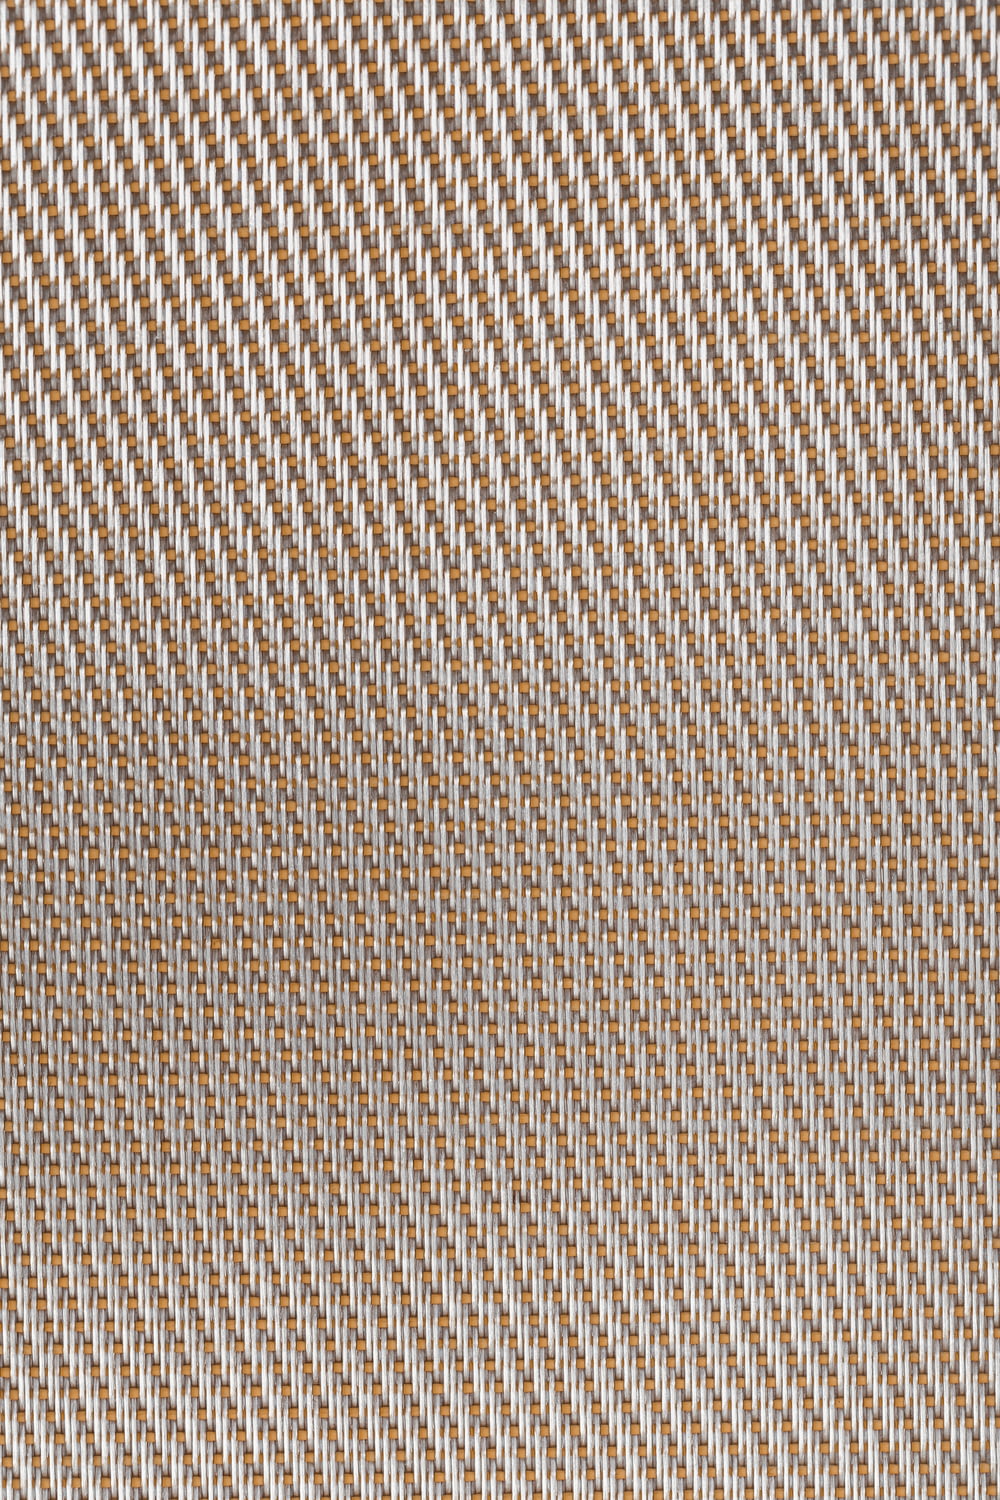 a close up view of a brown and white checkered fabric